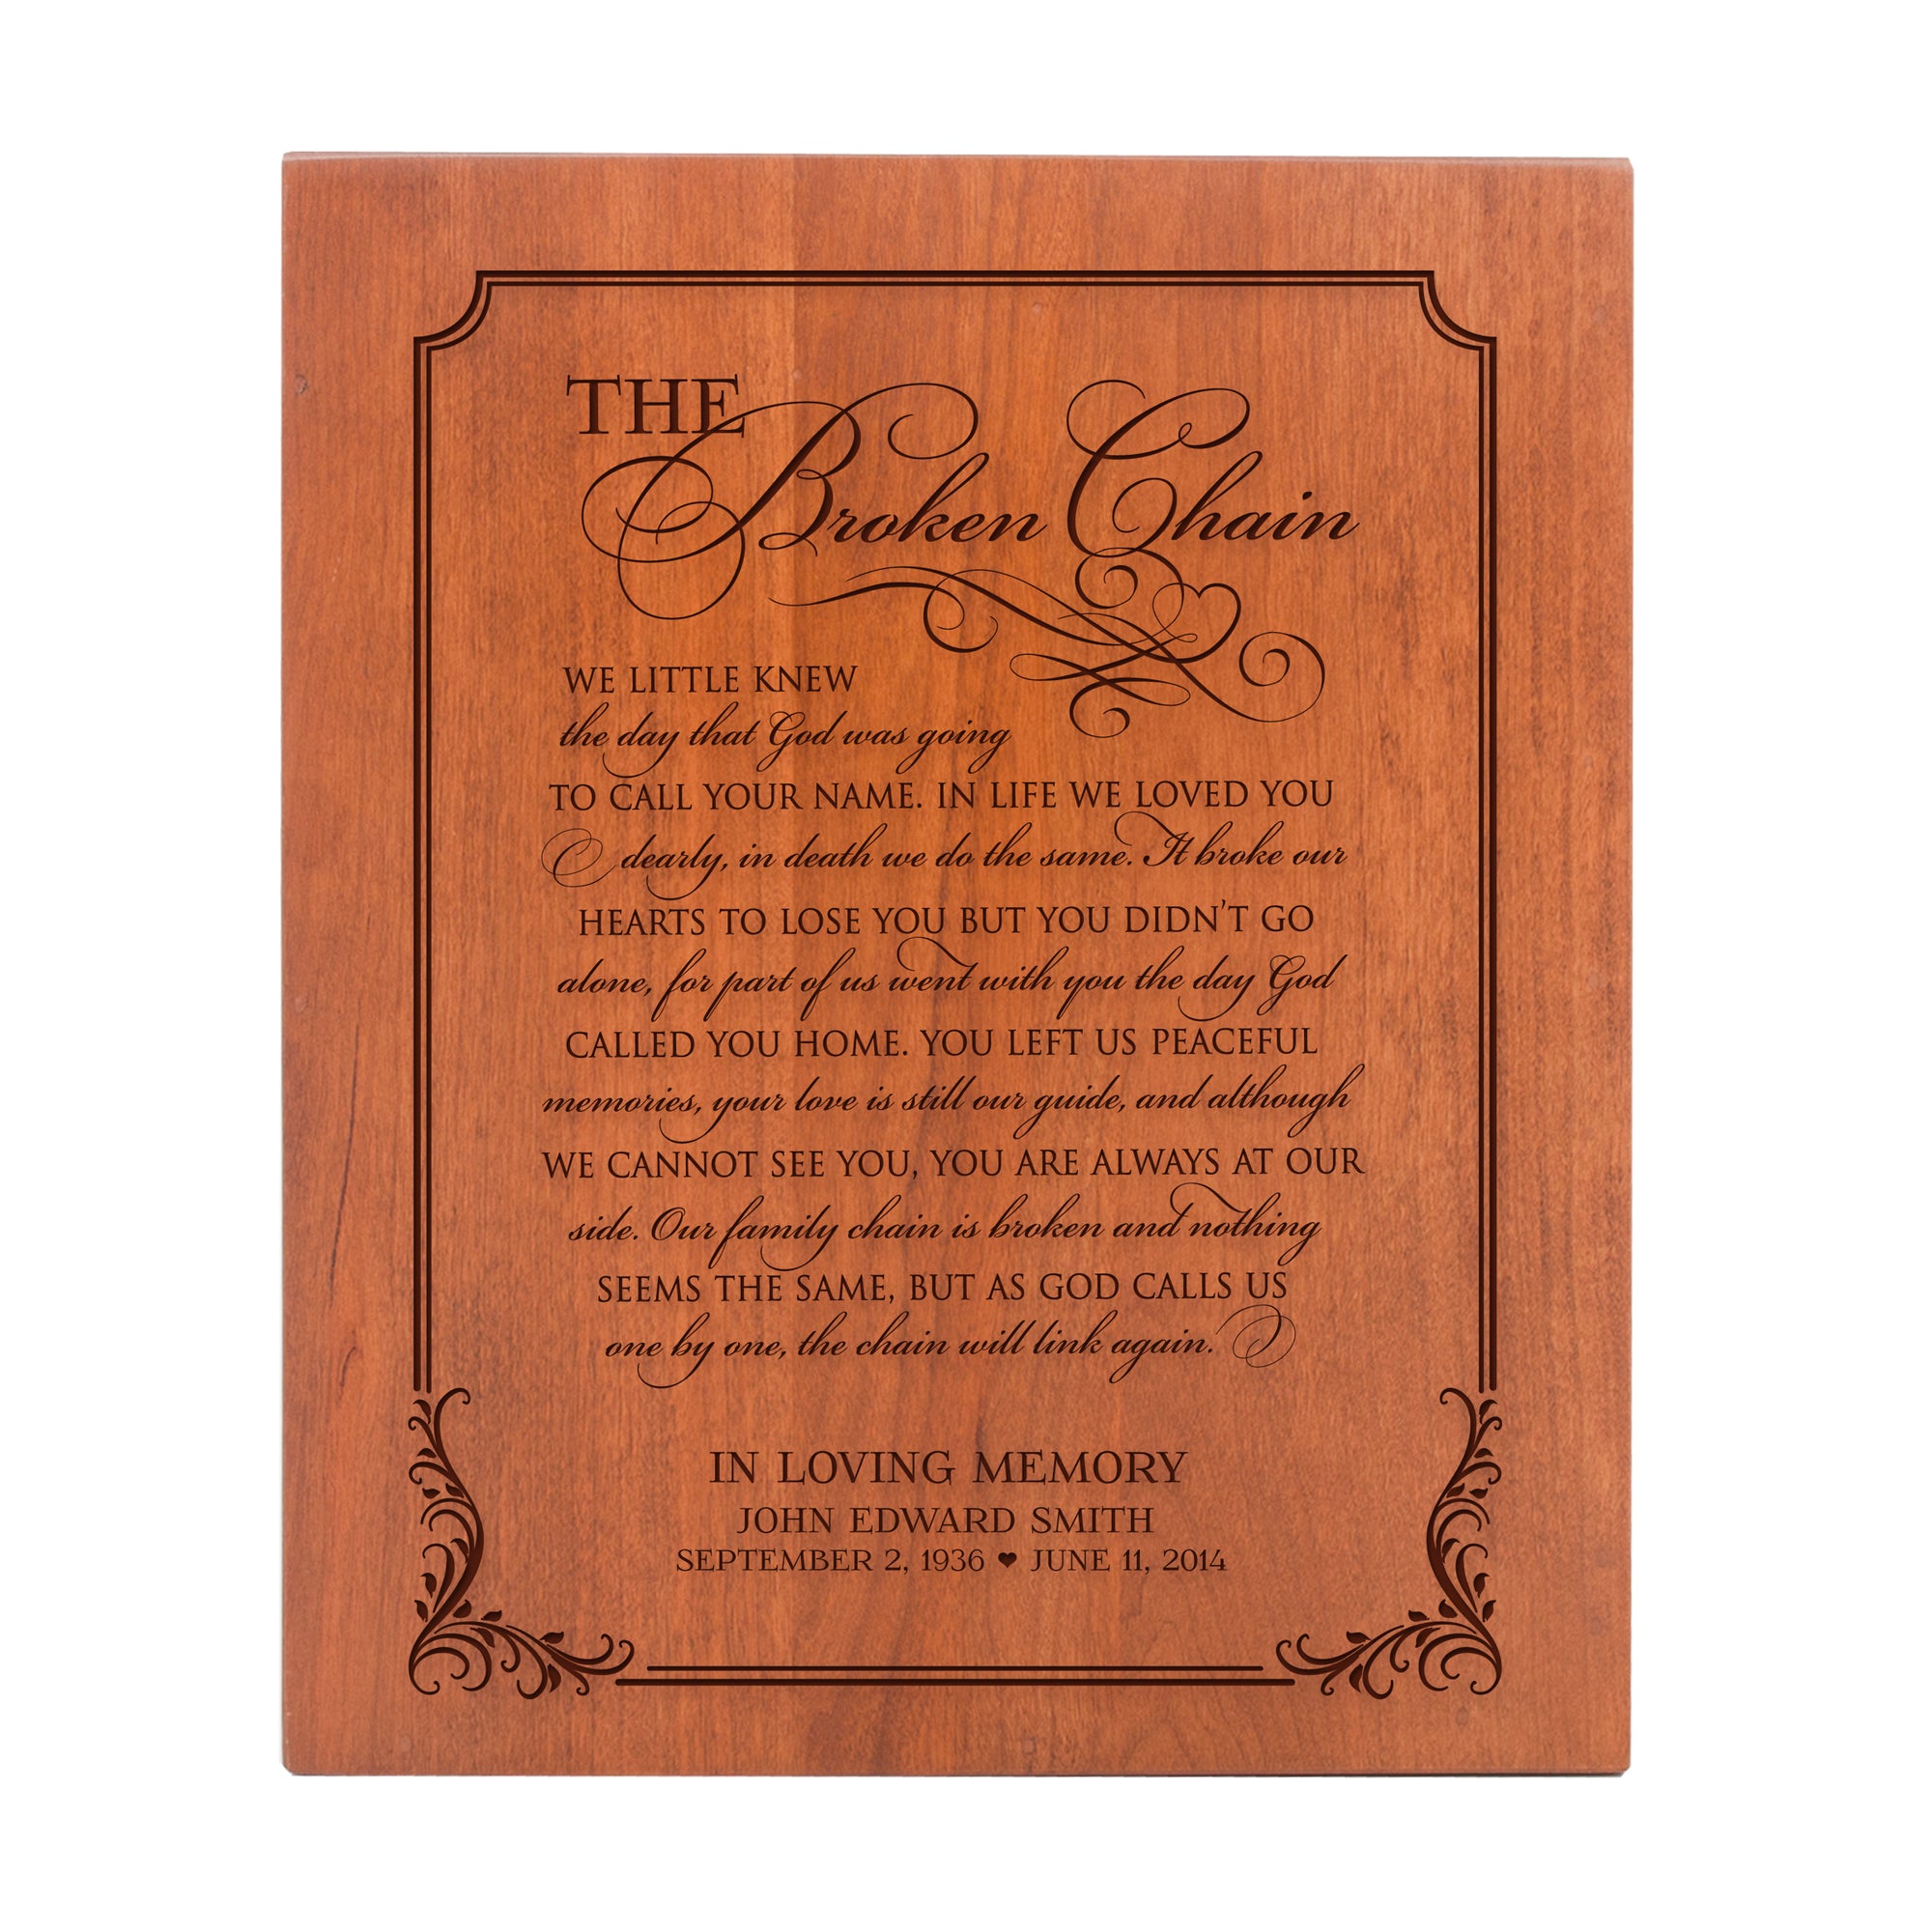 LifeSong Milestones Personalized Memorial Scattering Cremation Urn for Human Ashes Bereavement Remembrance Funeral Sympathy Keepsake Box for Loss of Loved One - Spread Ashes in the Sea Water Ocean - Holds 215 Cubic Inches of Ashes 8.25” x 10.25”